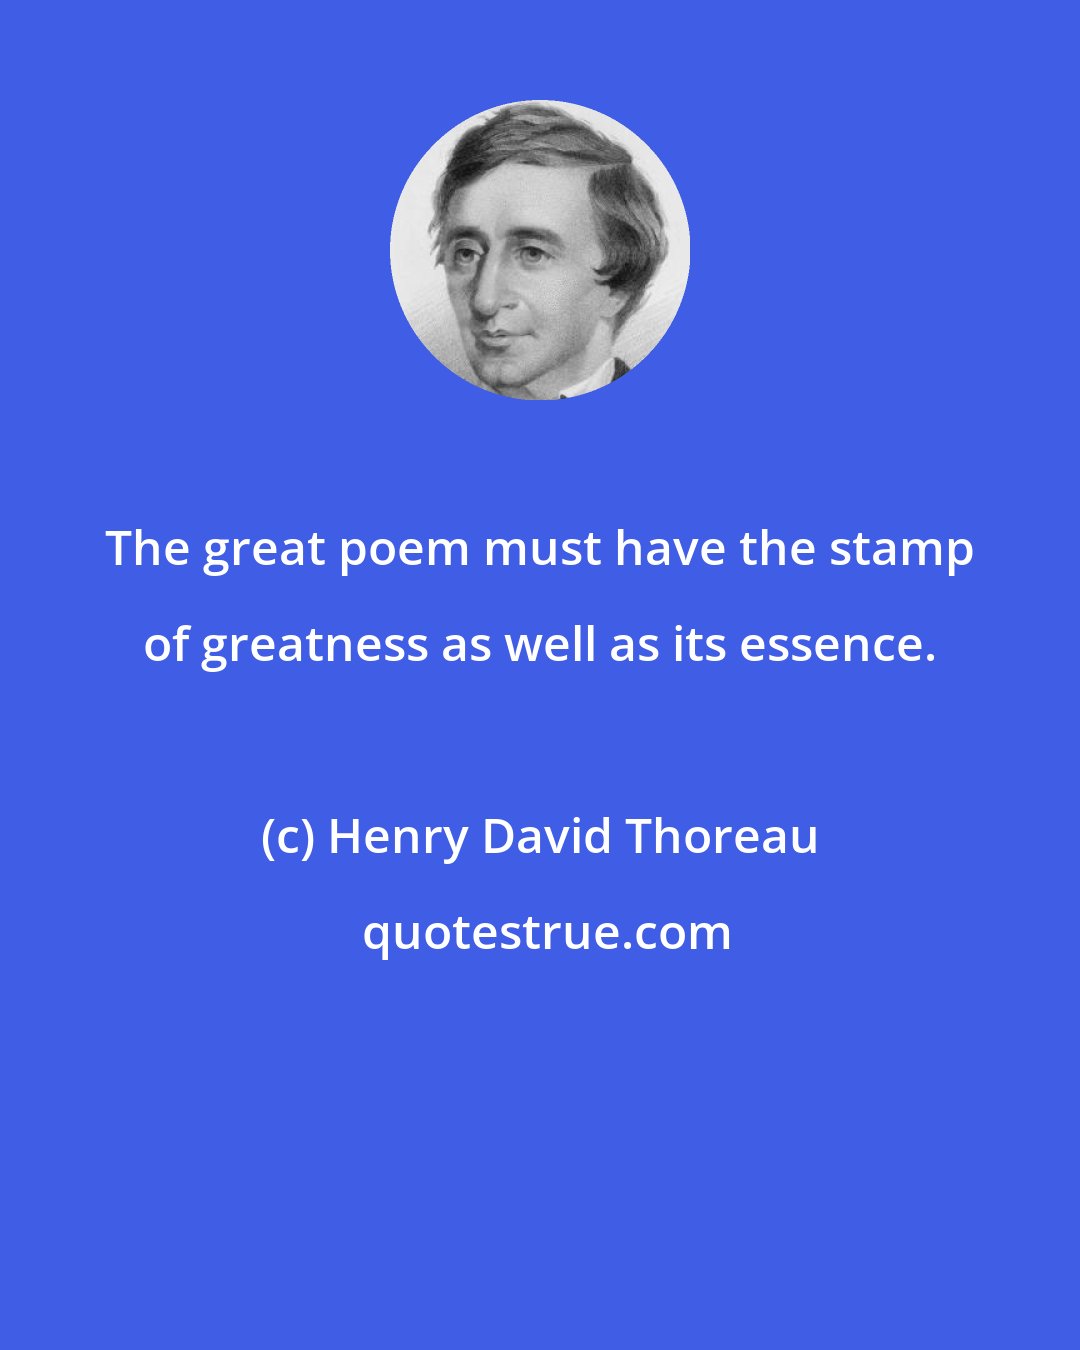 Henry David Thoreau: The great poem must have the stamp of greatness as well as its essence.